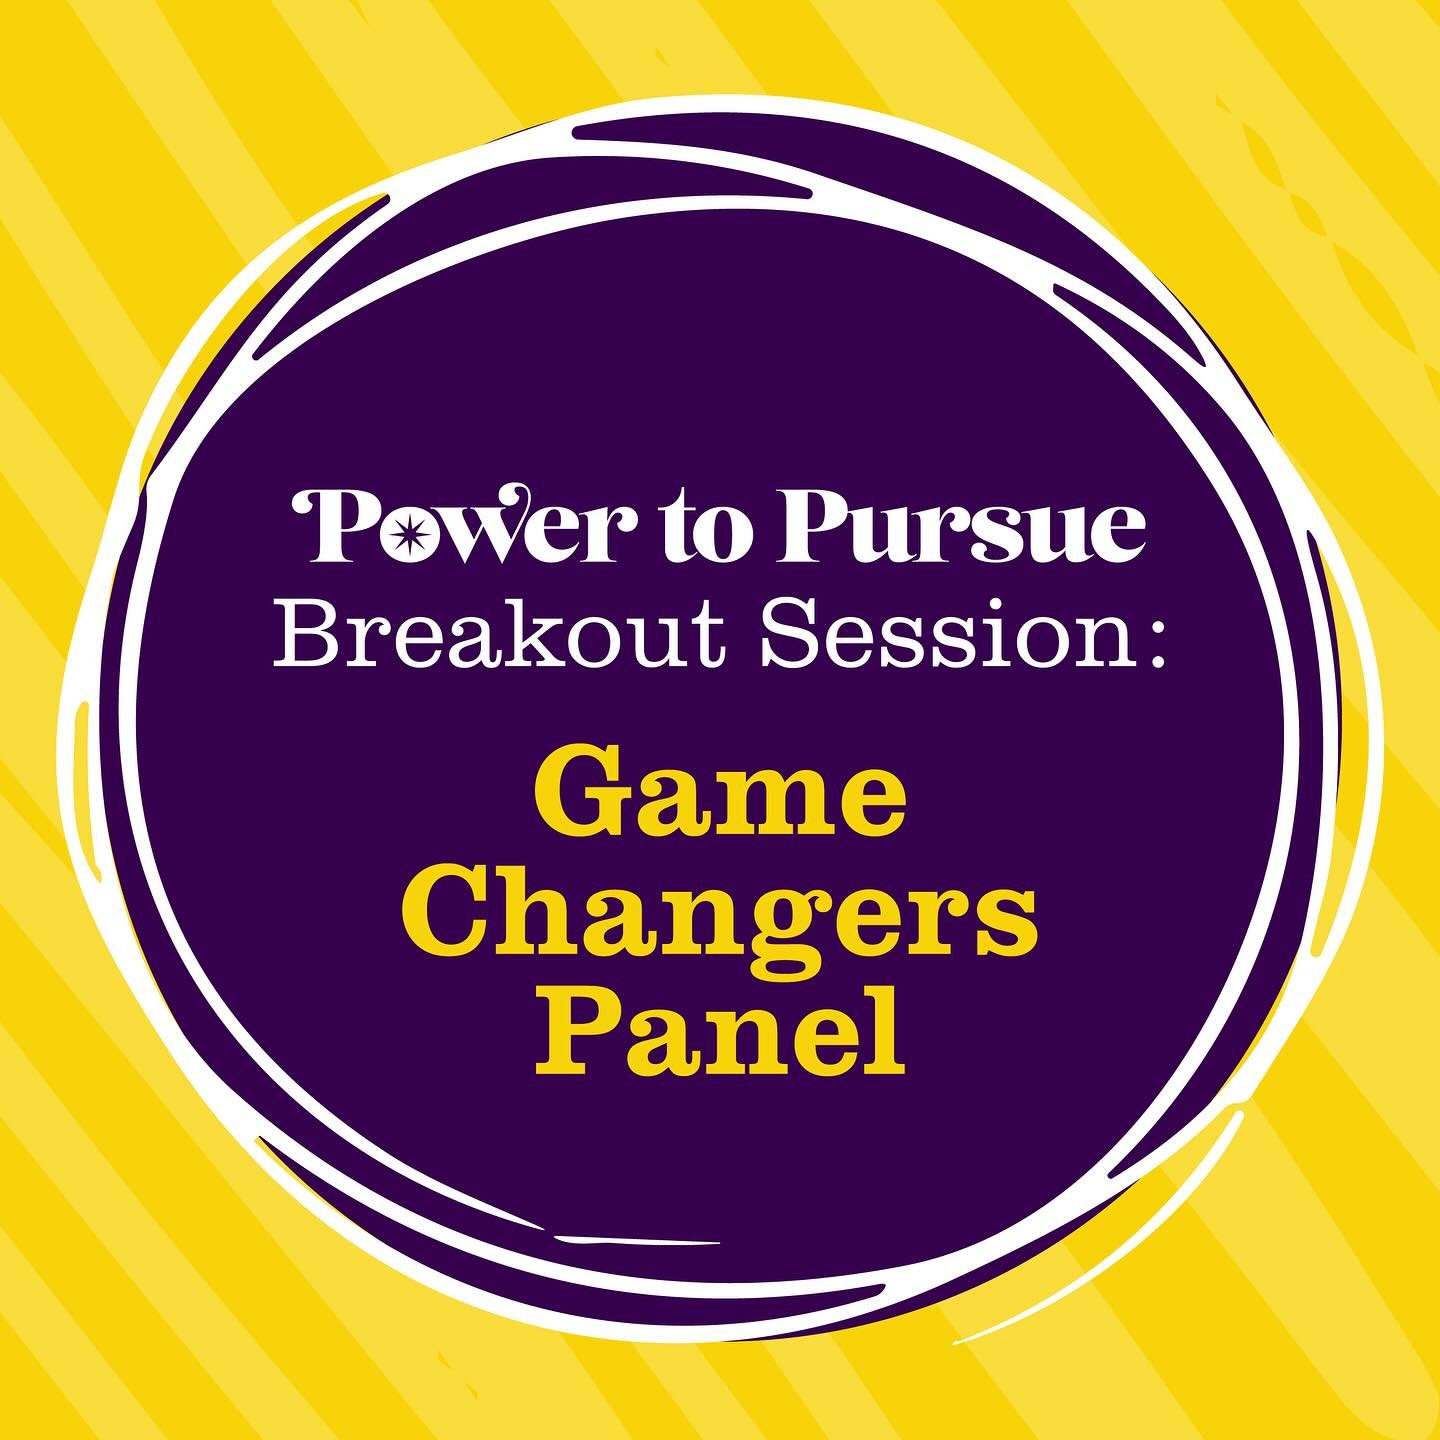 It&rsquo;s time for the Game Changers Panel! 

Power to Pursue is full of Game Changers. This panel highlights women in our region who are changing the game, both in their offices and in their communities. These women believe there is room for all of